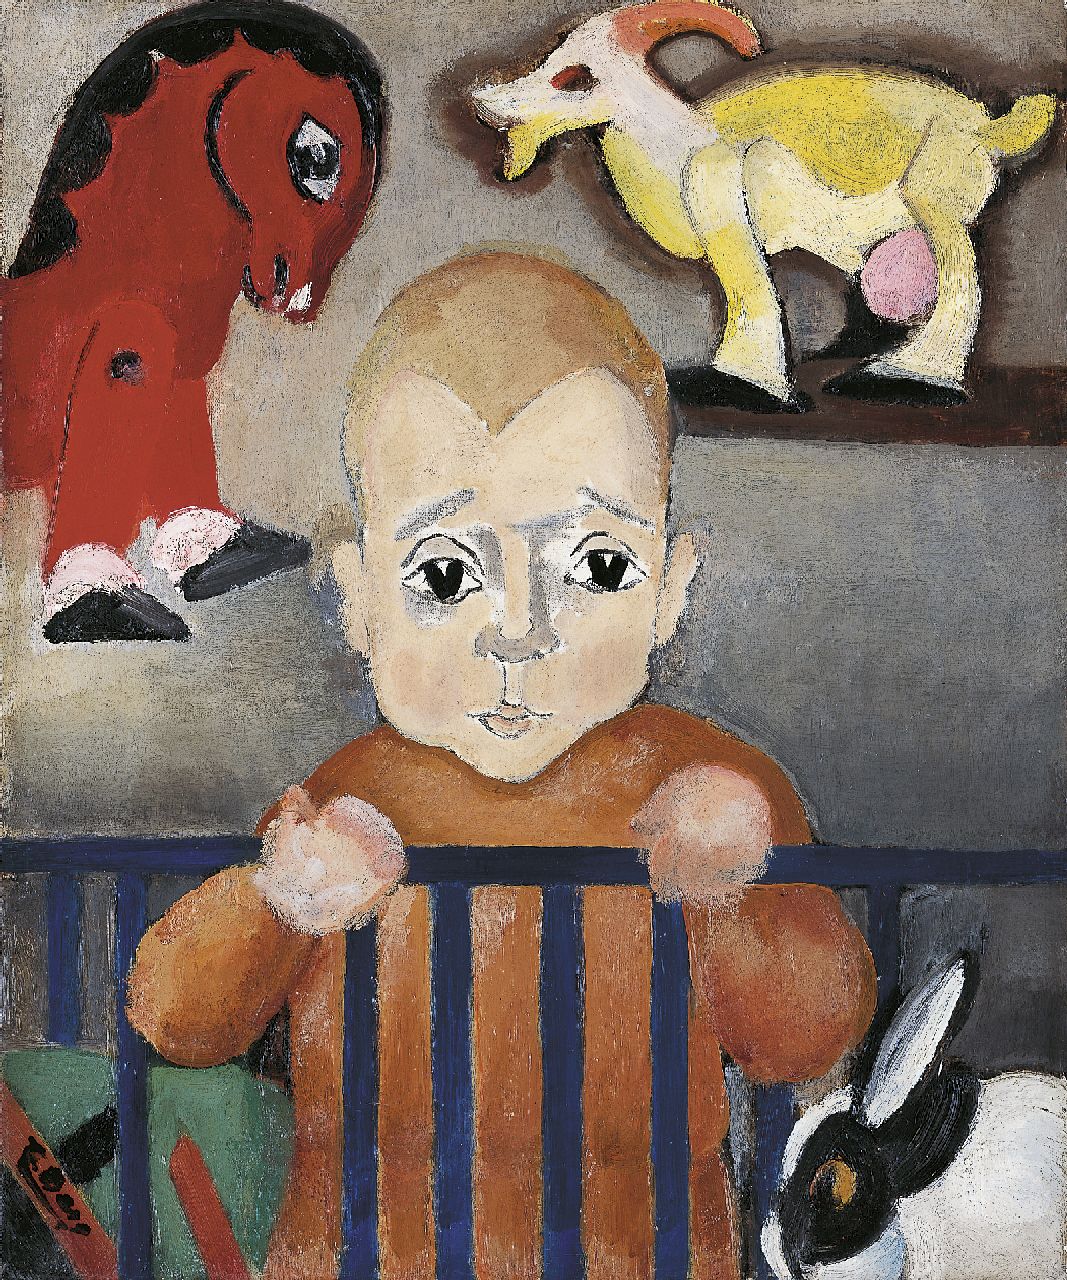 Berg E.  | Else Berg, A young boy with his toy animals, Öl auf Leinwand 46,4 x 38,5 cm, signed l.l. und painted circa 1930